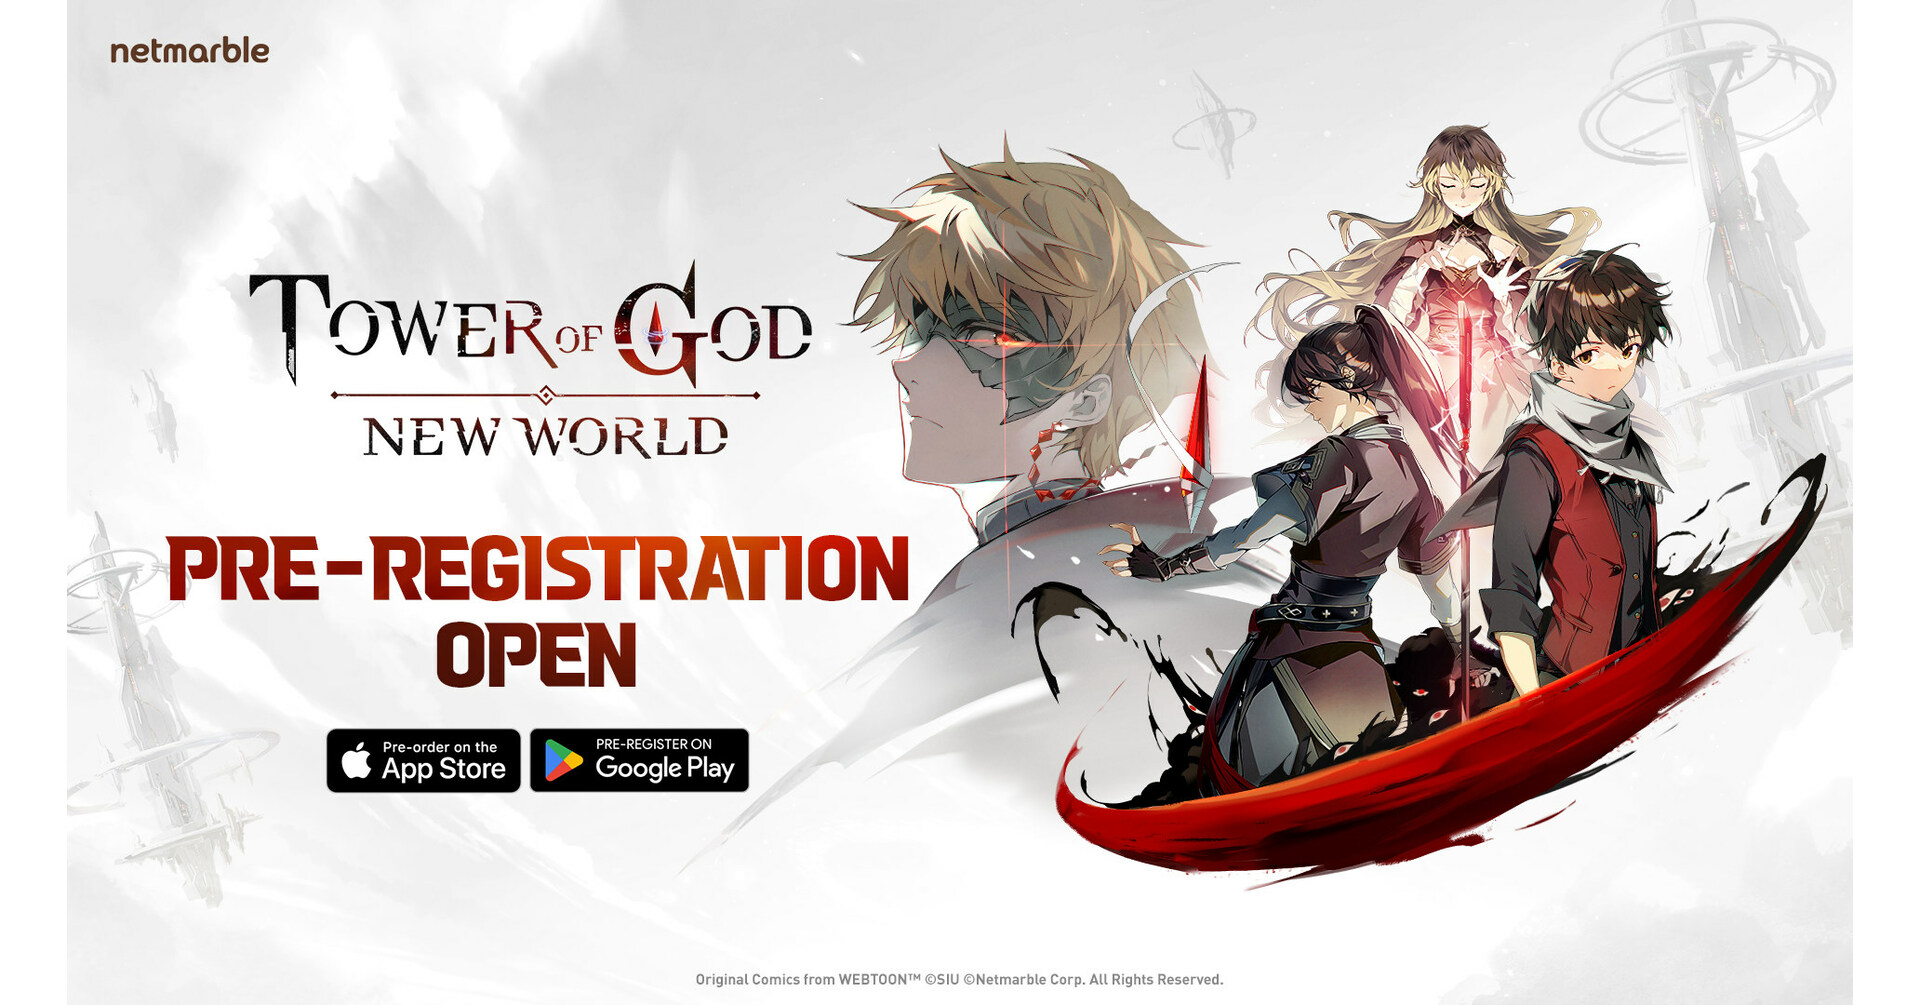 Tower of God: New World